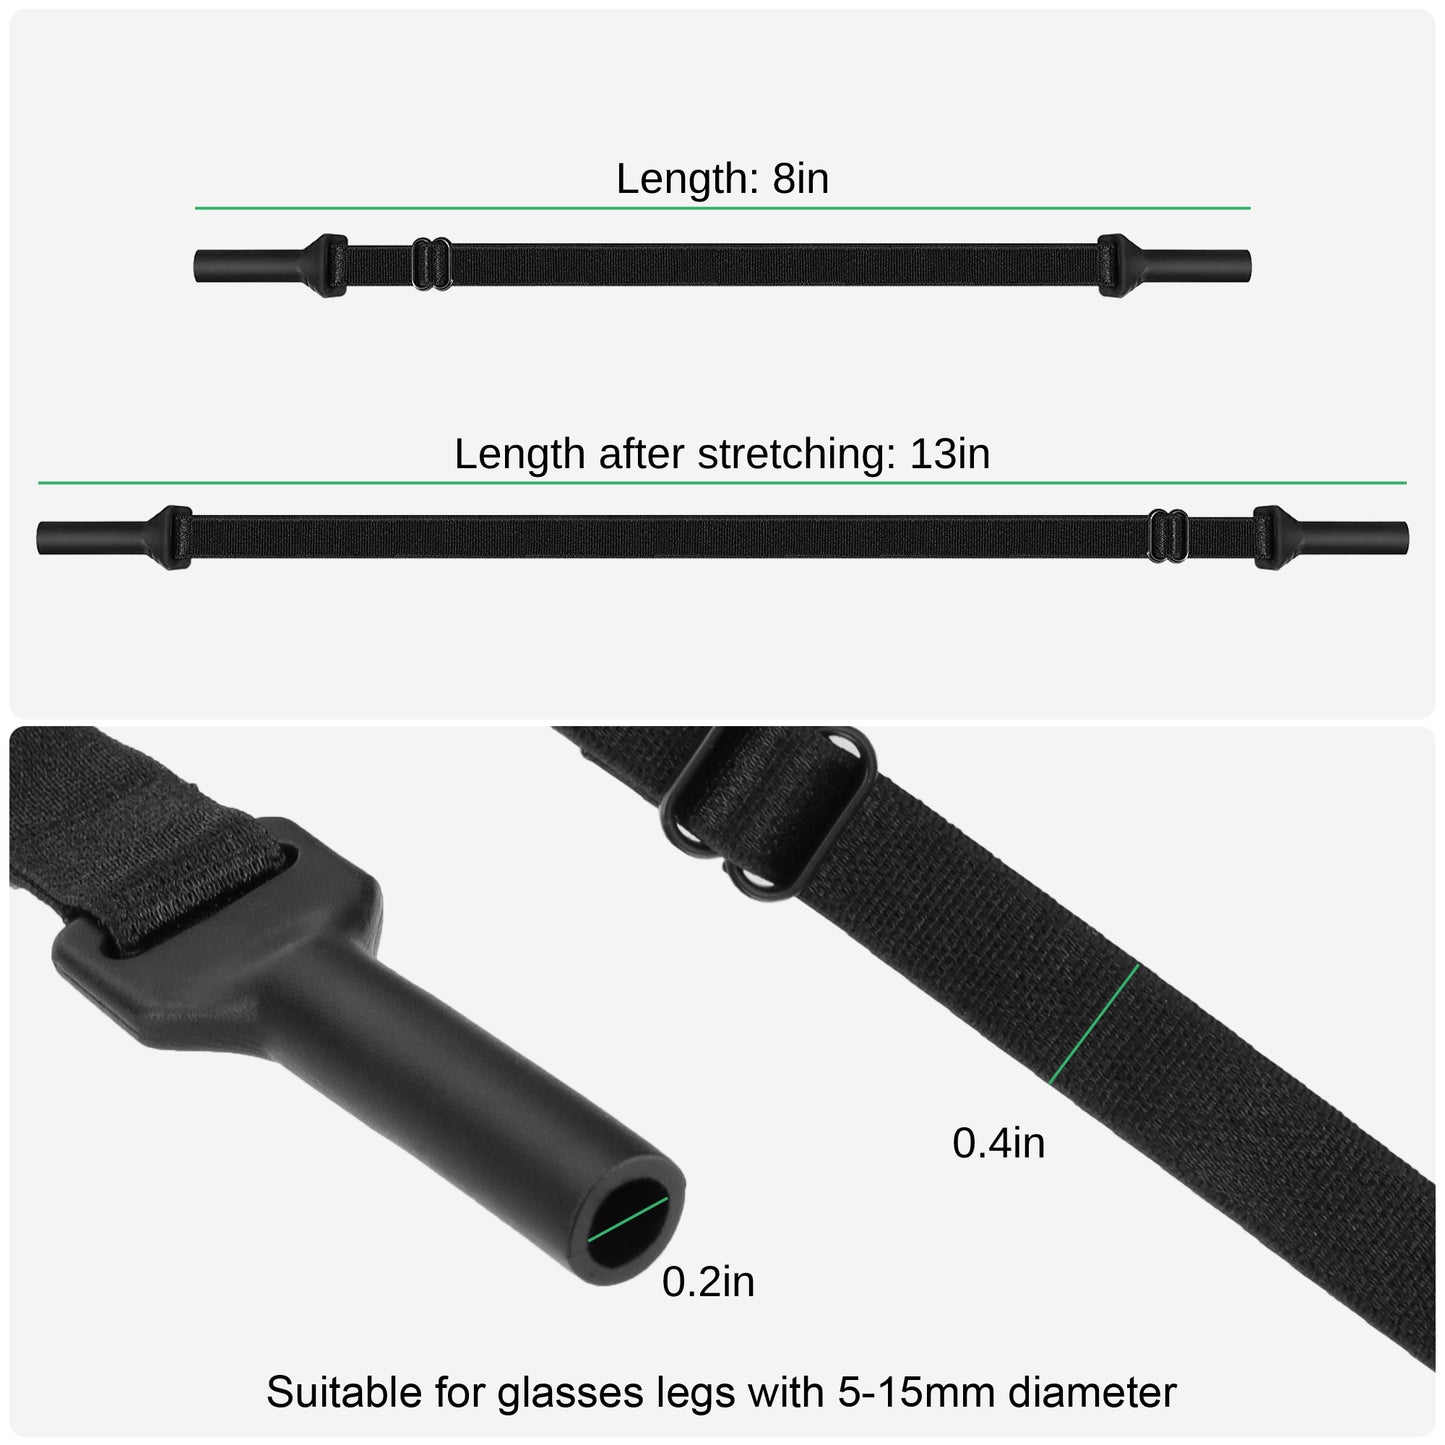 10pcs Adjustable Anti-Slip Glasses Straps - No Tail Eyeglass Straps for Safety and Comfort, Ideal for Unisex Sunglasses, Sports, and Reading Glasses (Black)